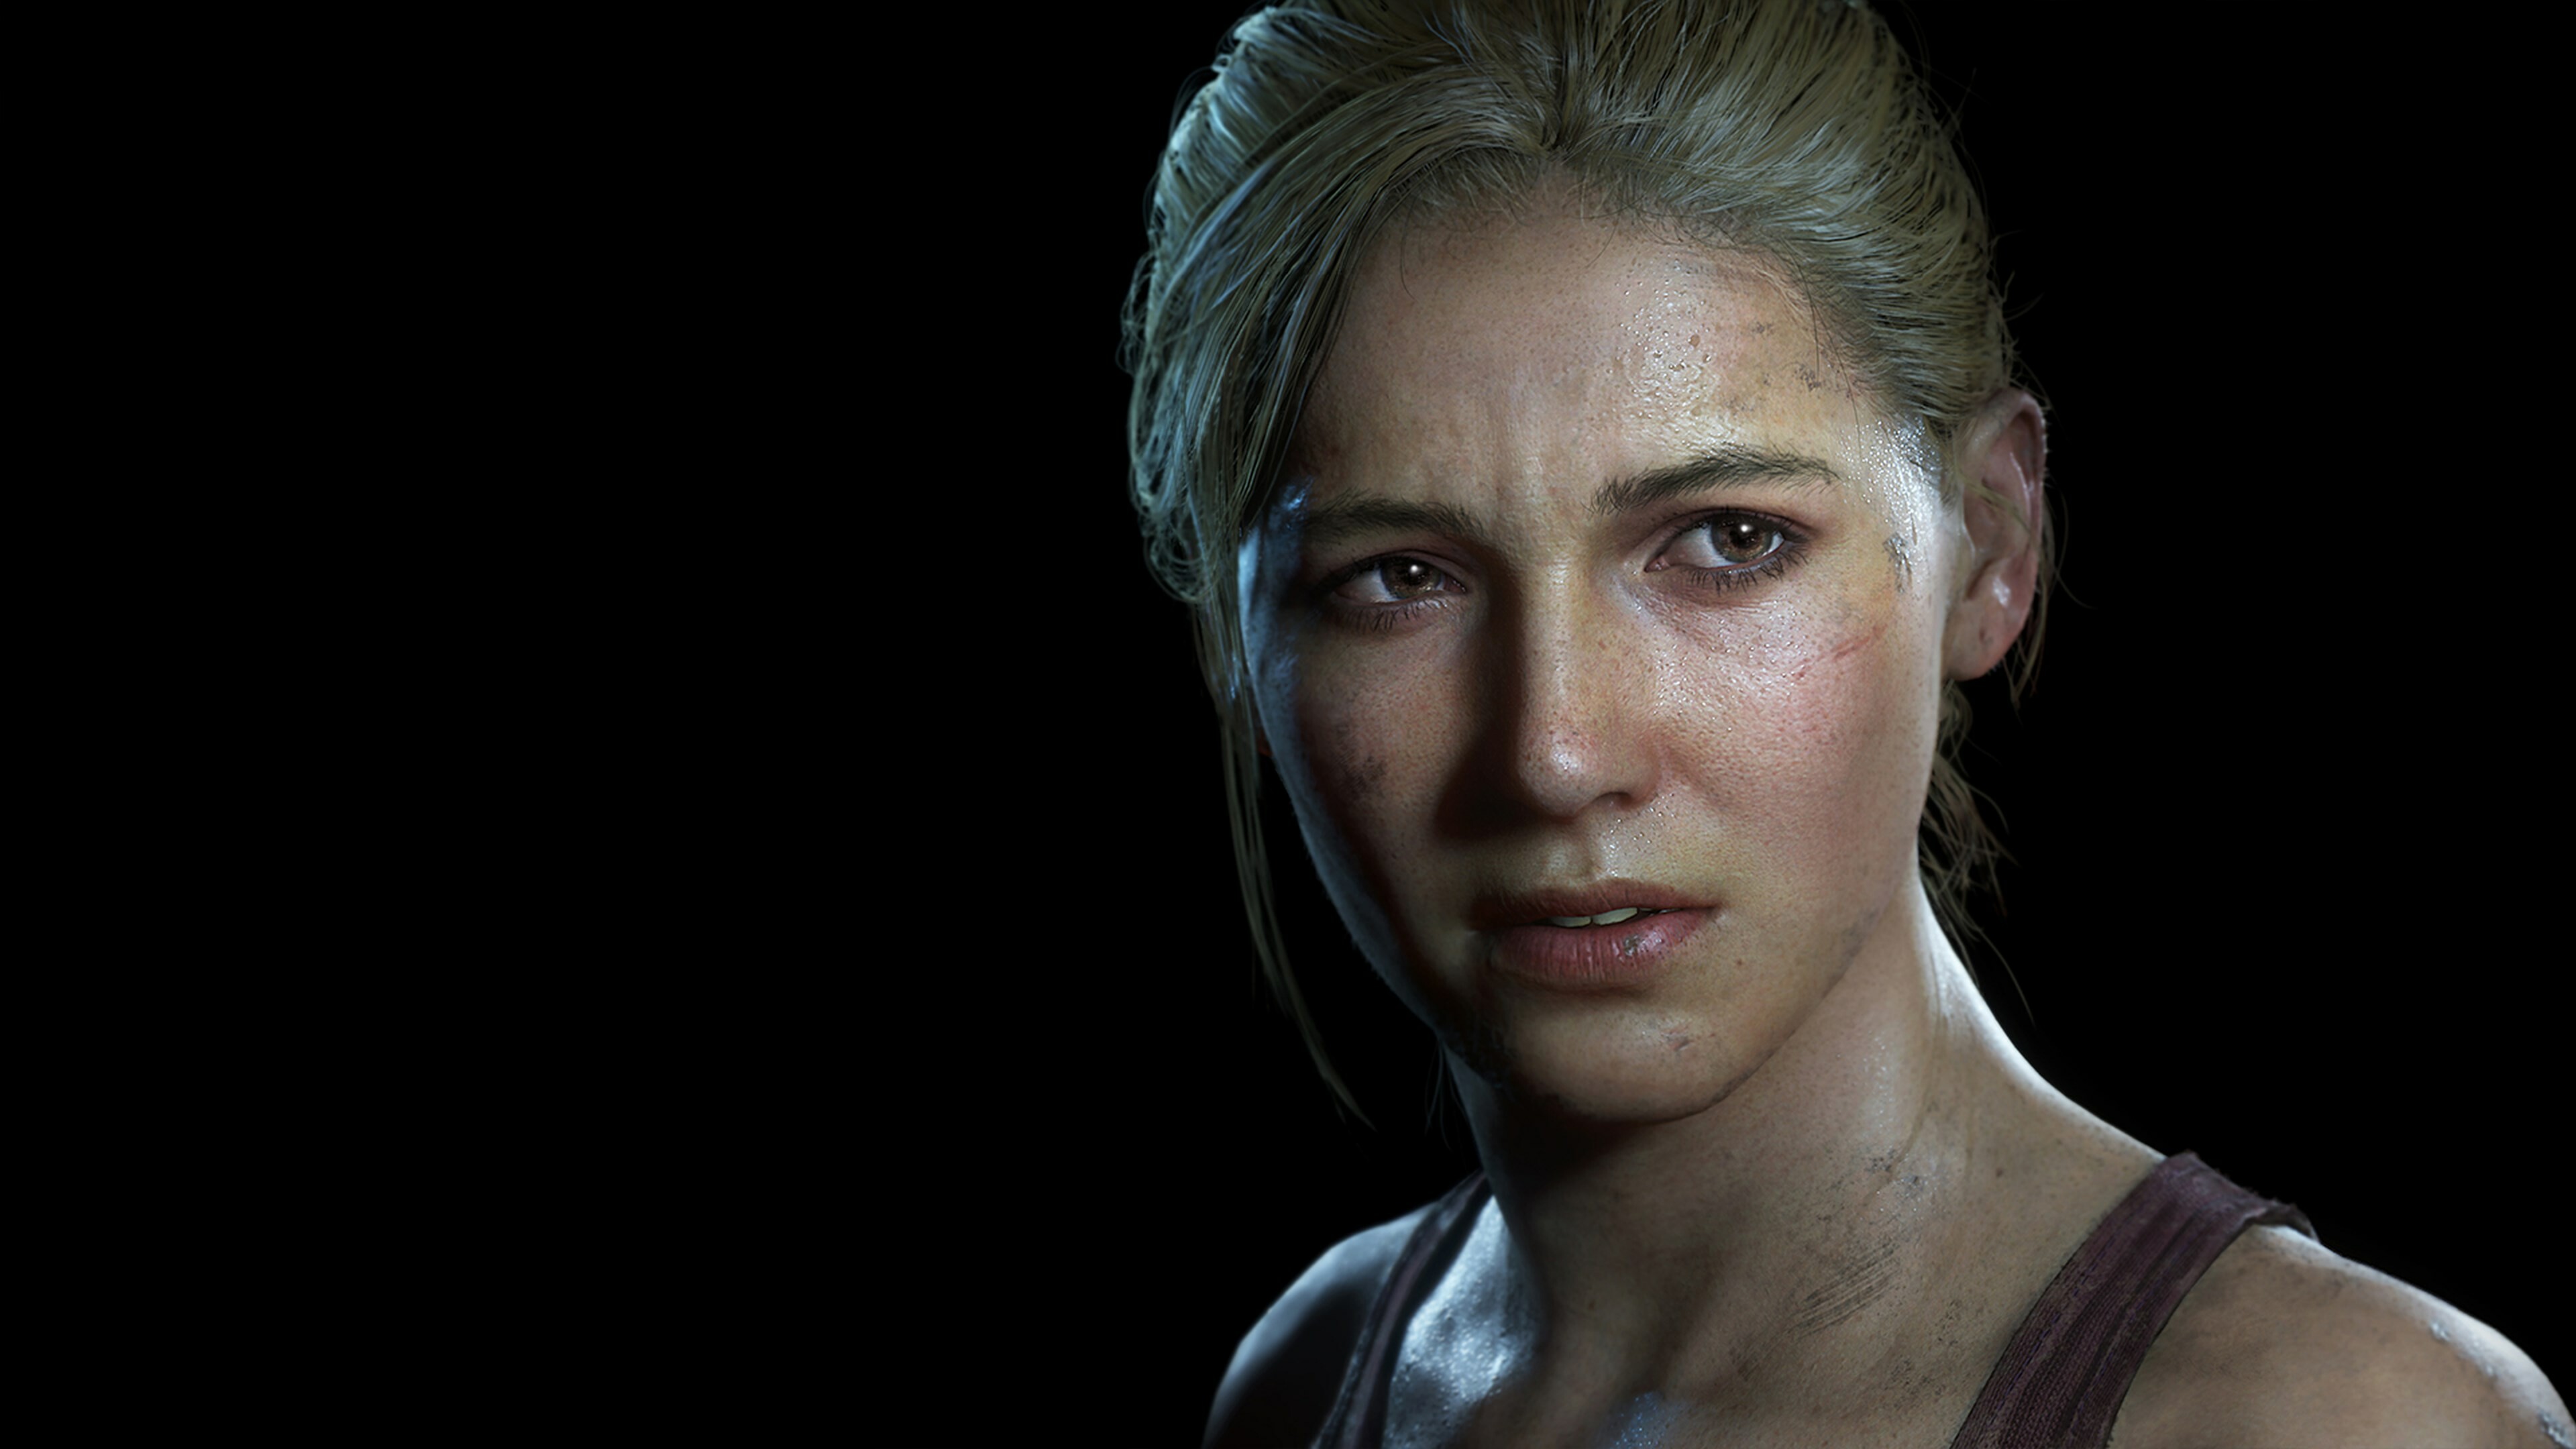 Uncharted: Elena Fisher, One of the two deuteragonists of the game series. 3840x2160 4K Background.